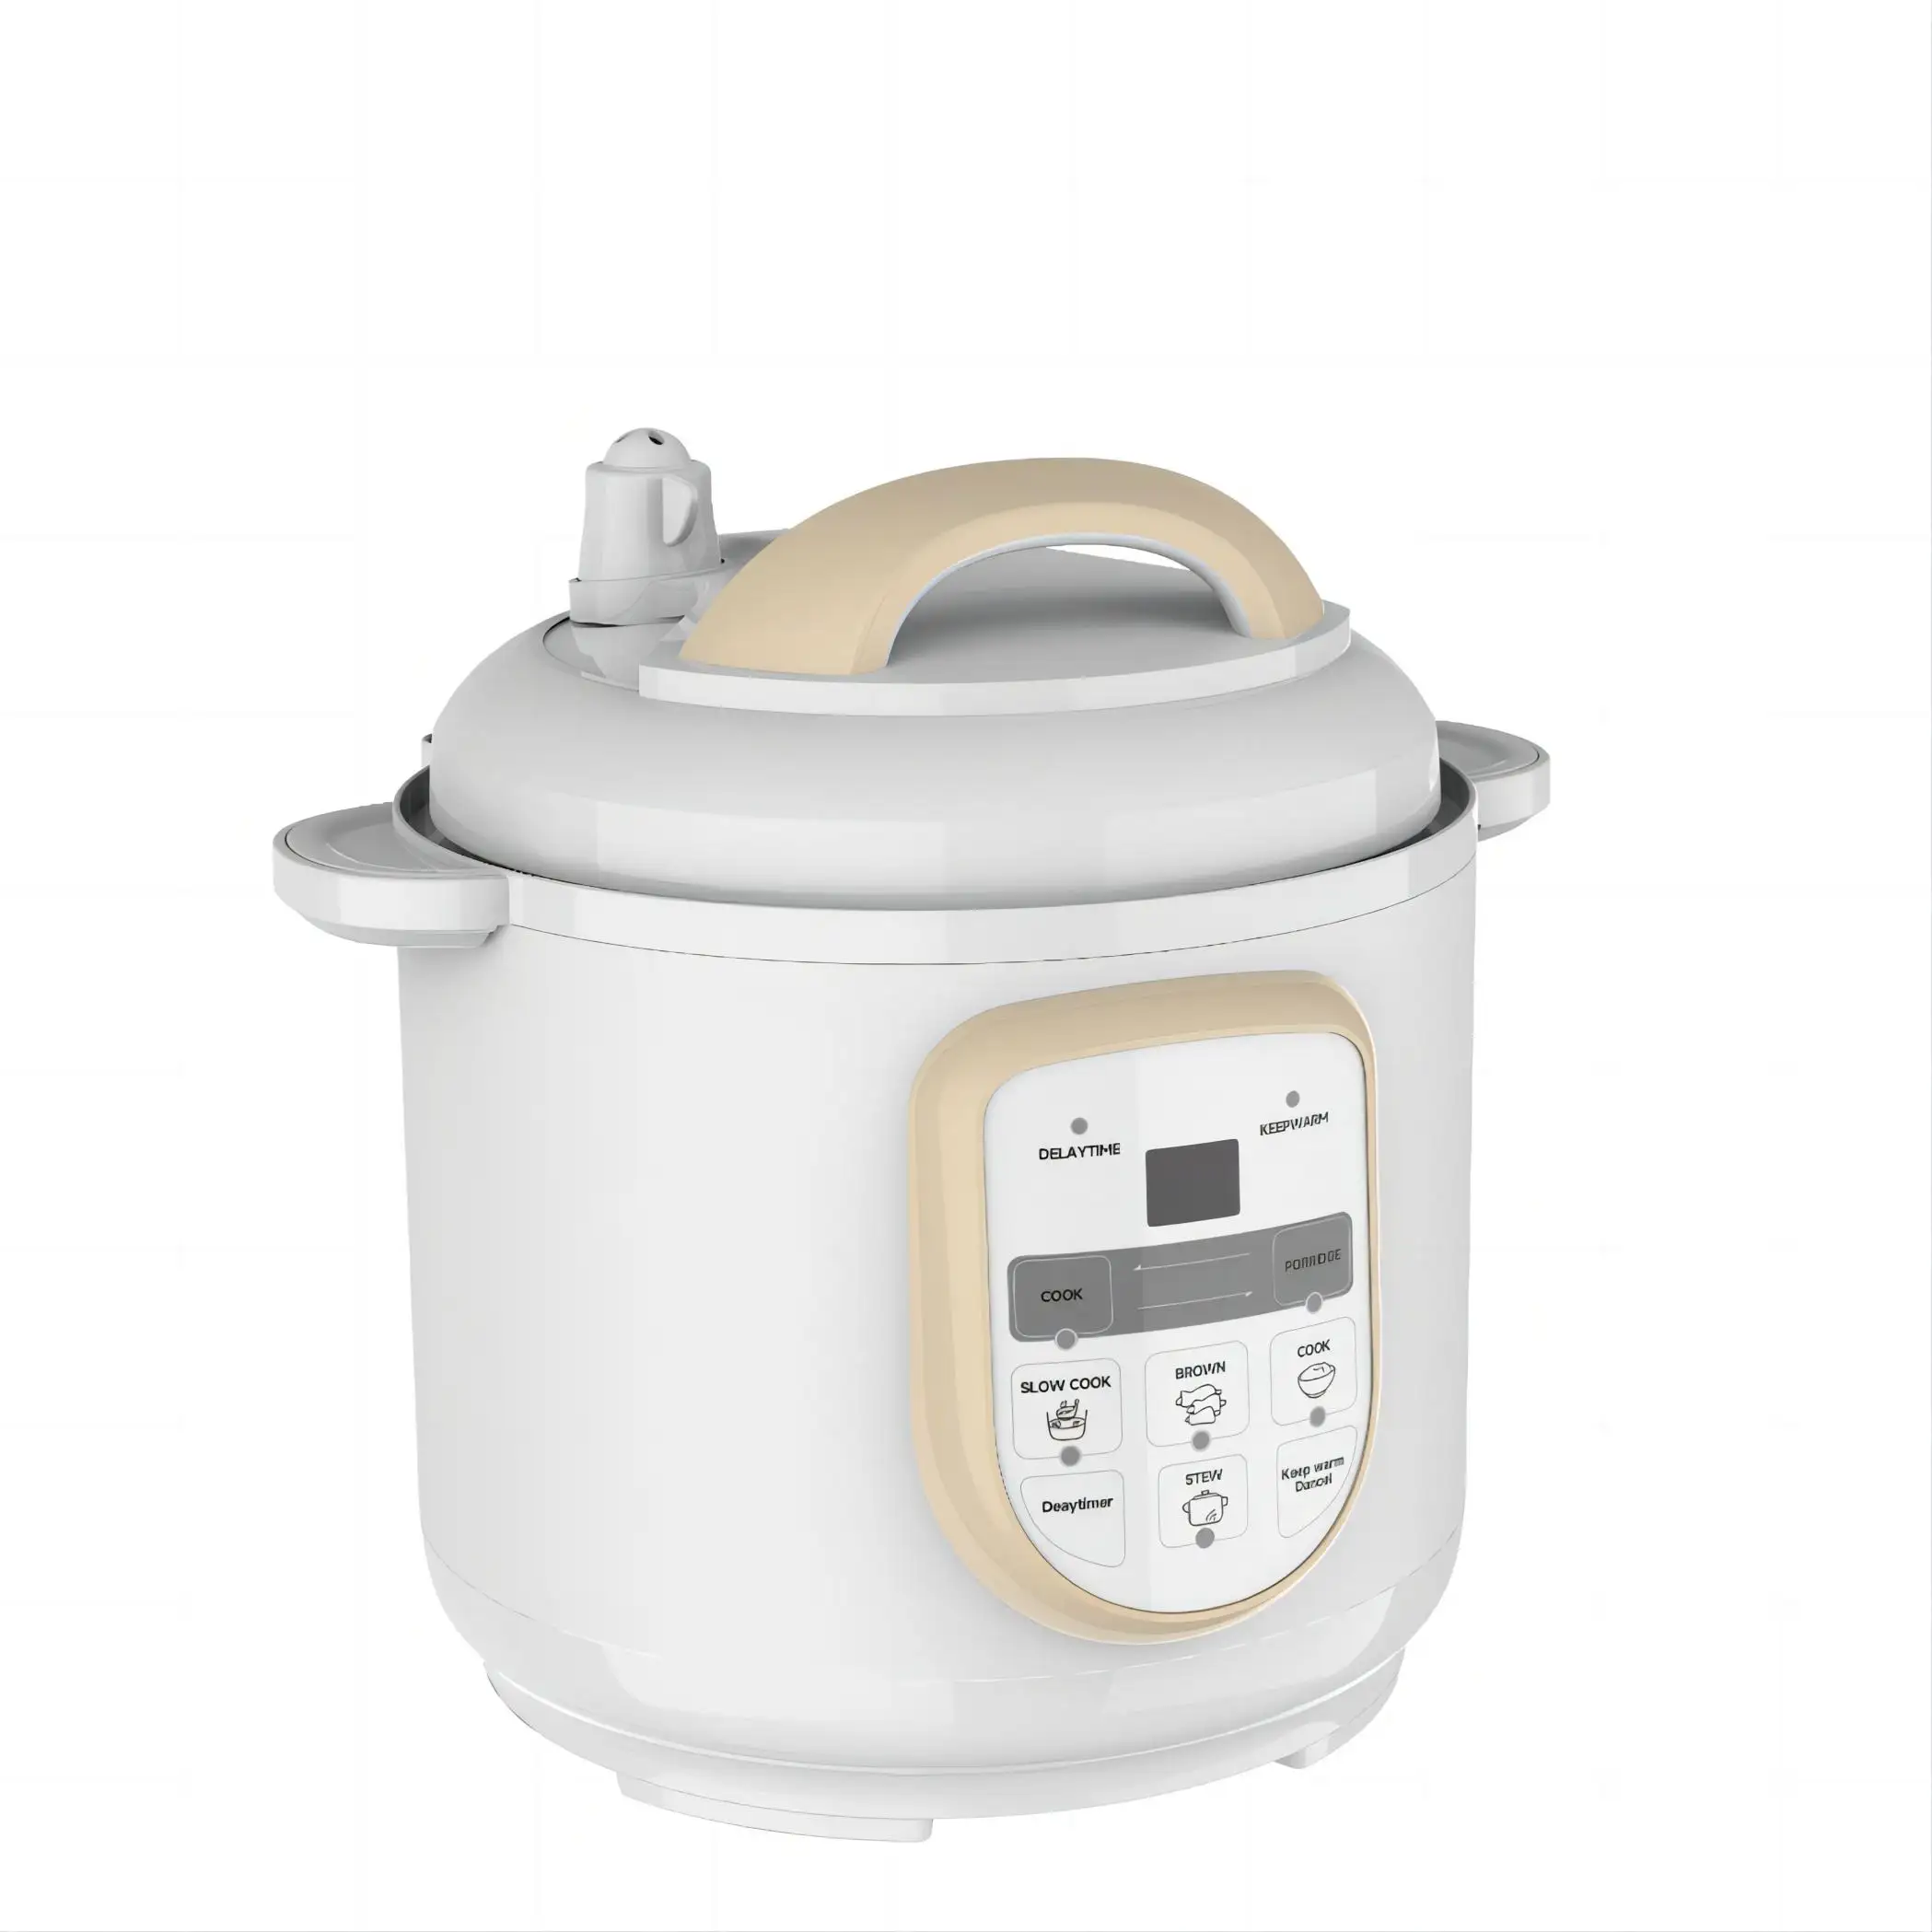 2.8L Small 2-4-person cooker Multiple colors multi 11 in 1 110V 30-70Ka gift household 2.8L electric pressure cooker